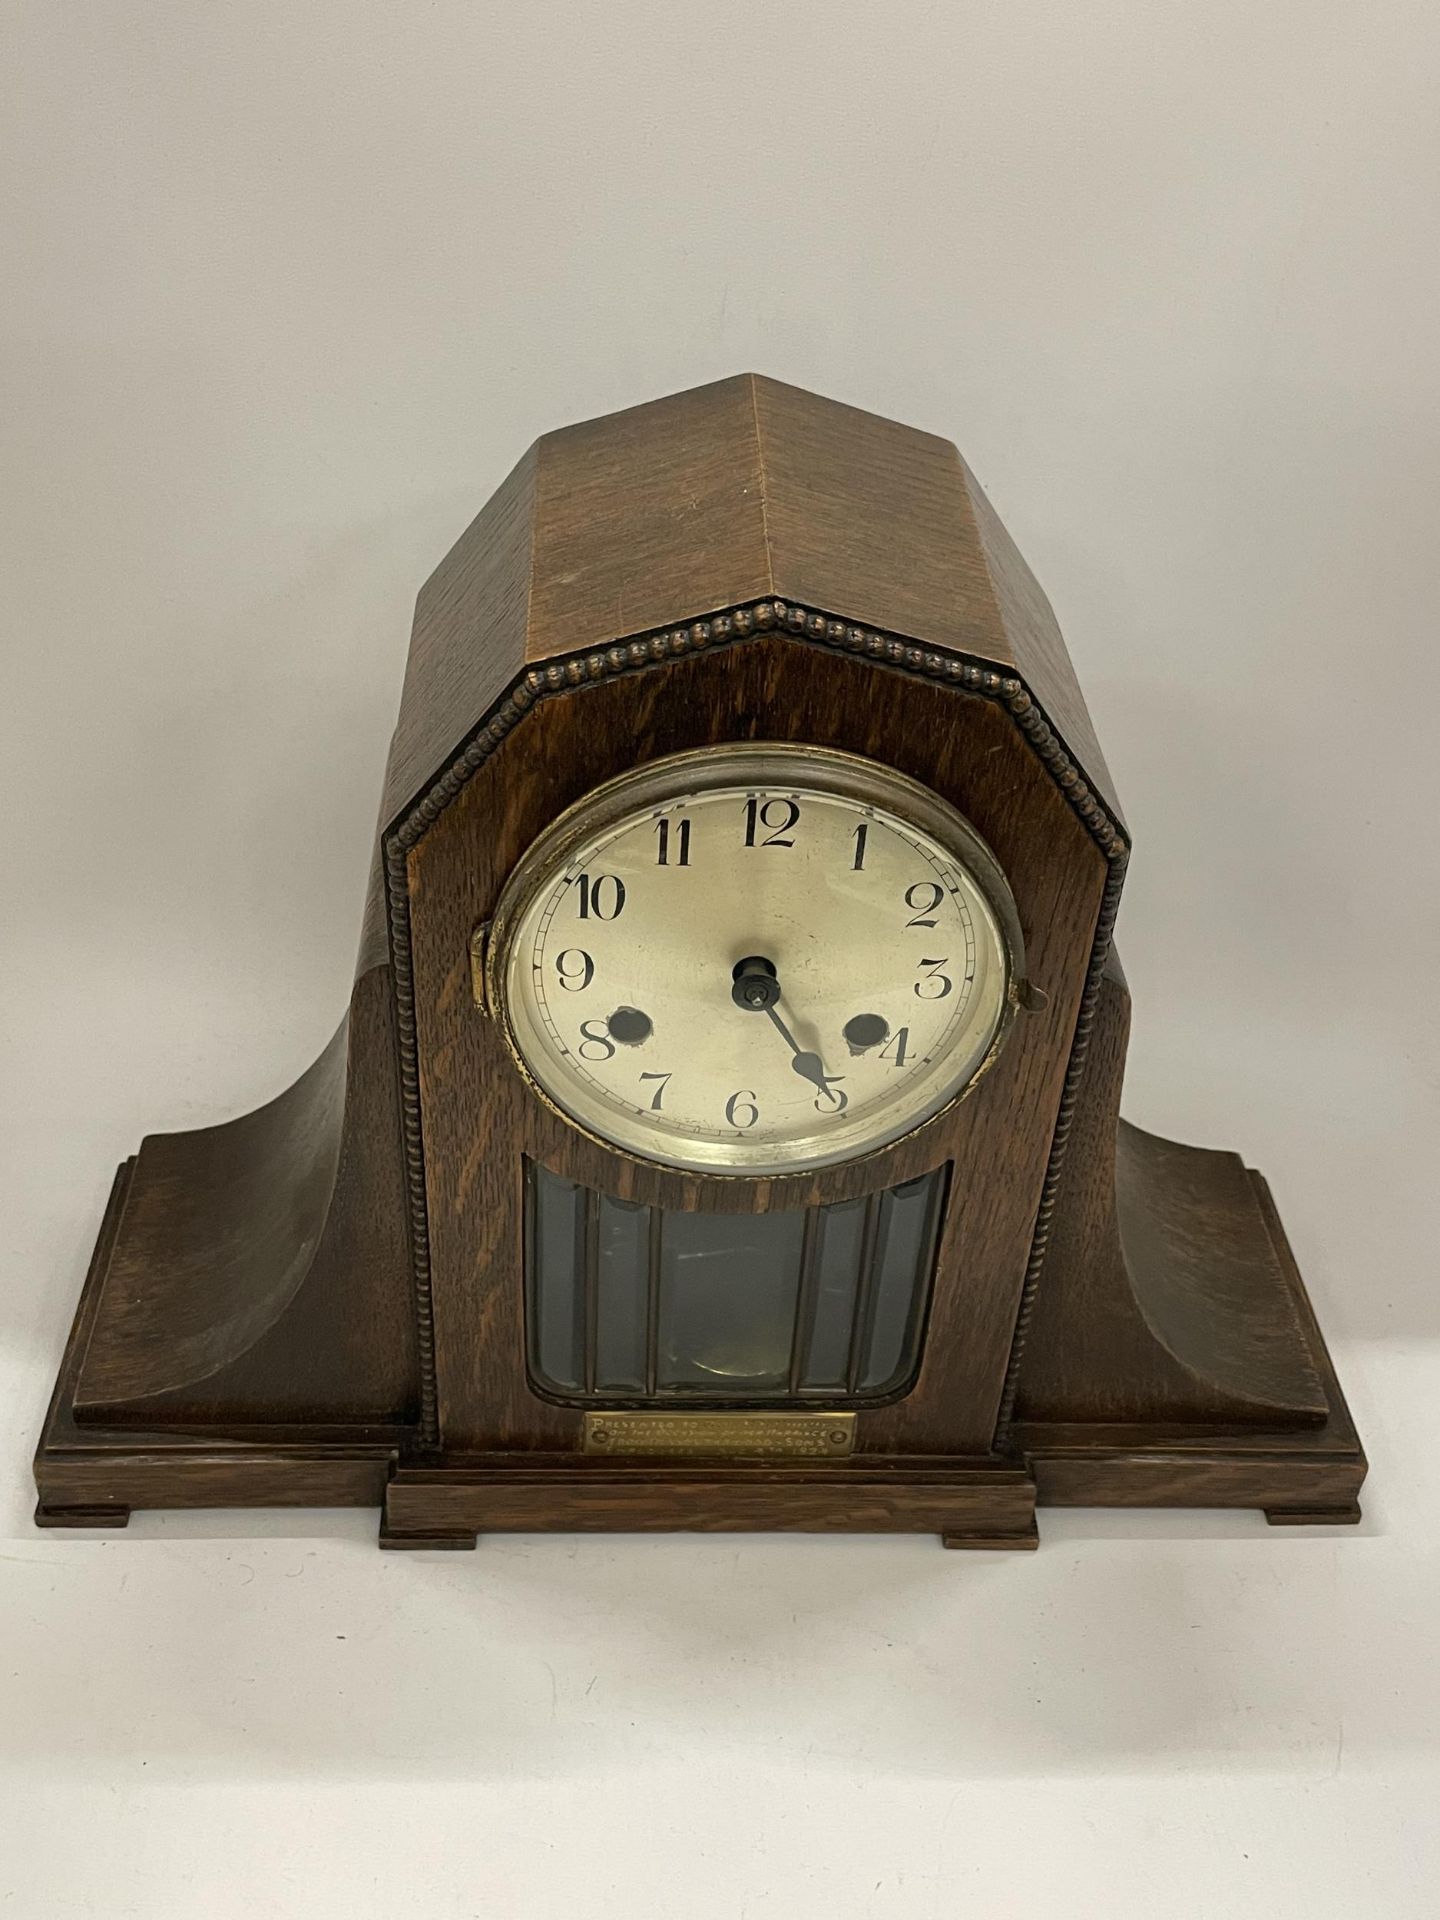 AN EARLY 20TH CENTURY OAK CHIMING MANTLE CLOCK WITH PRESENTATION PLAQUE DATED 1924